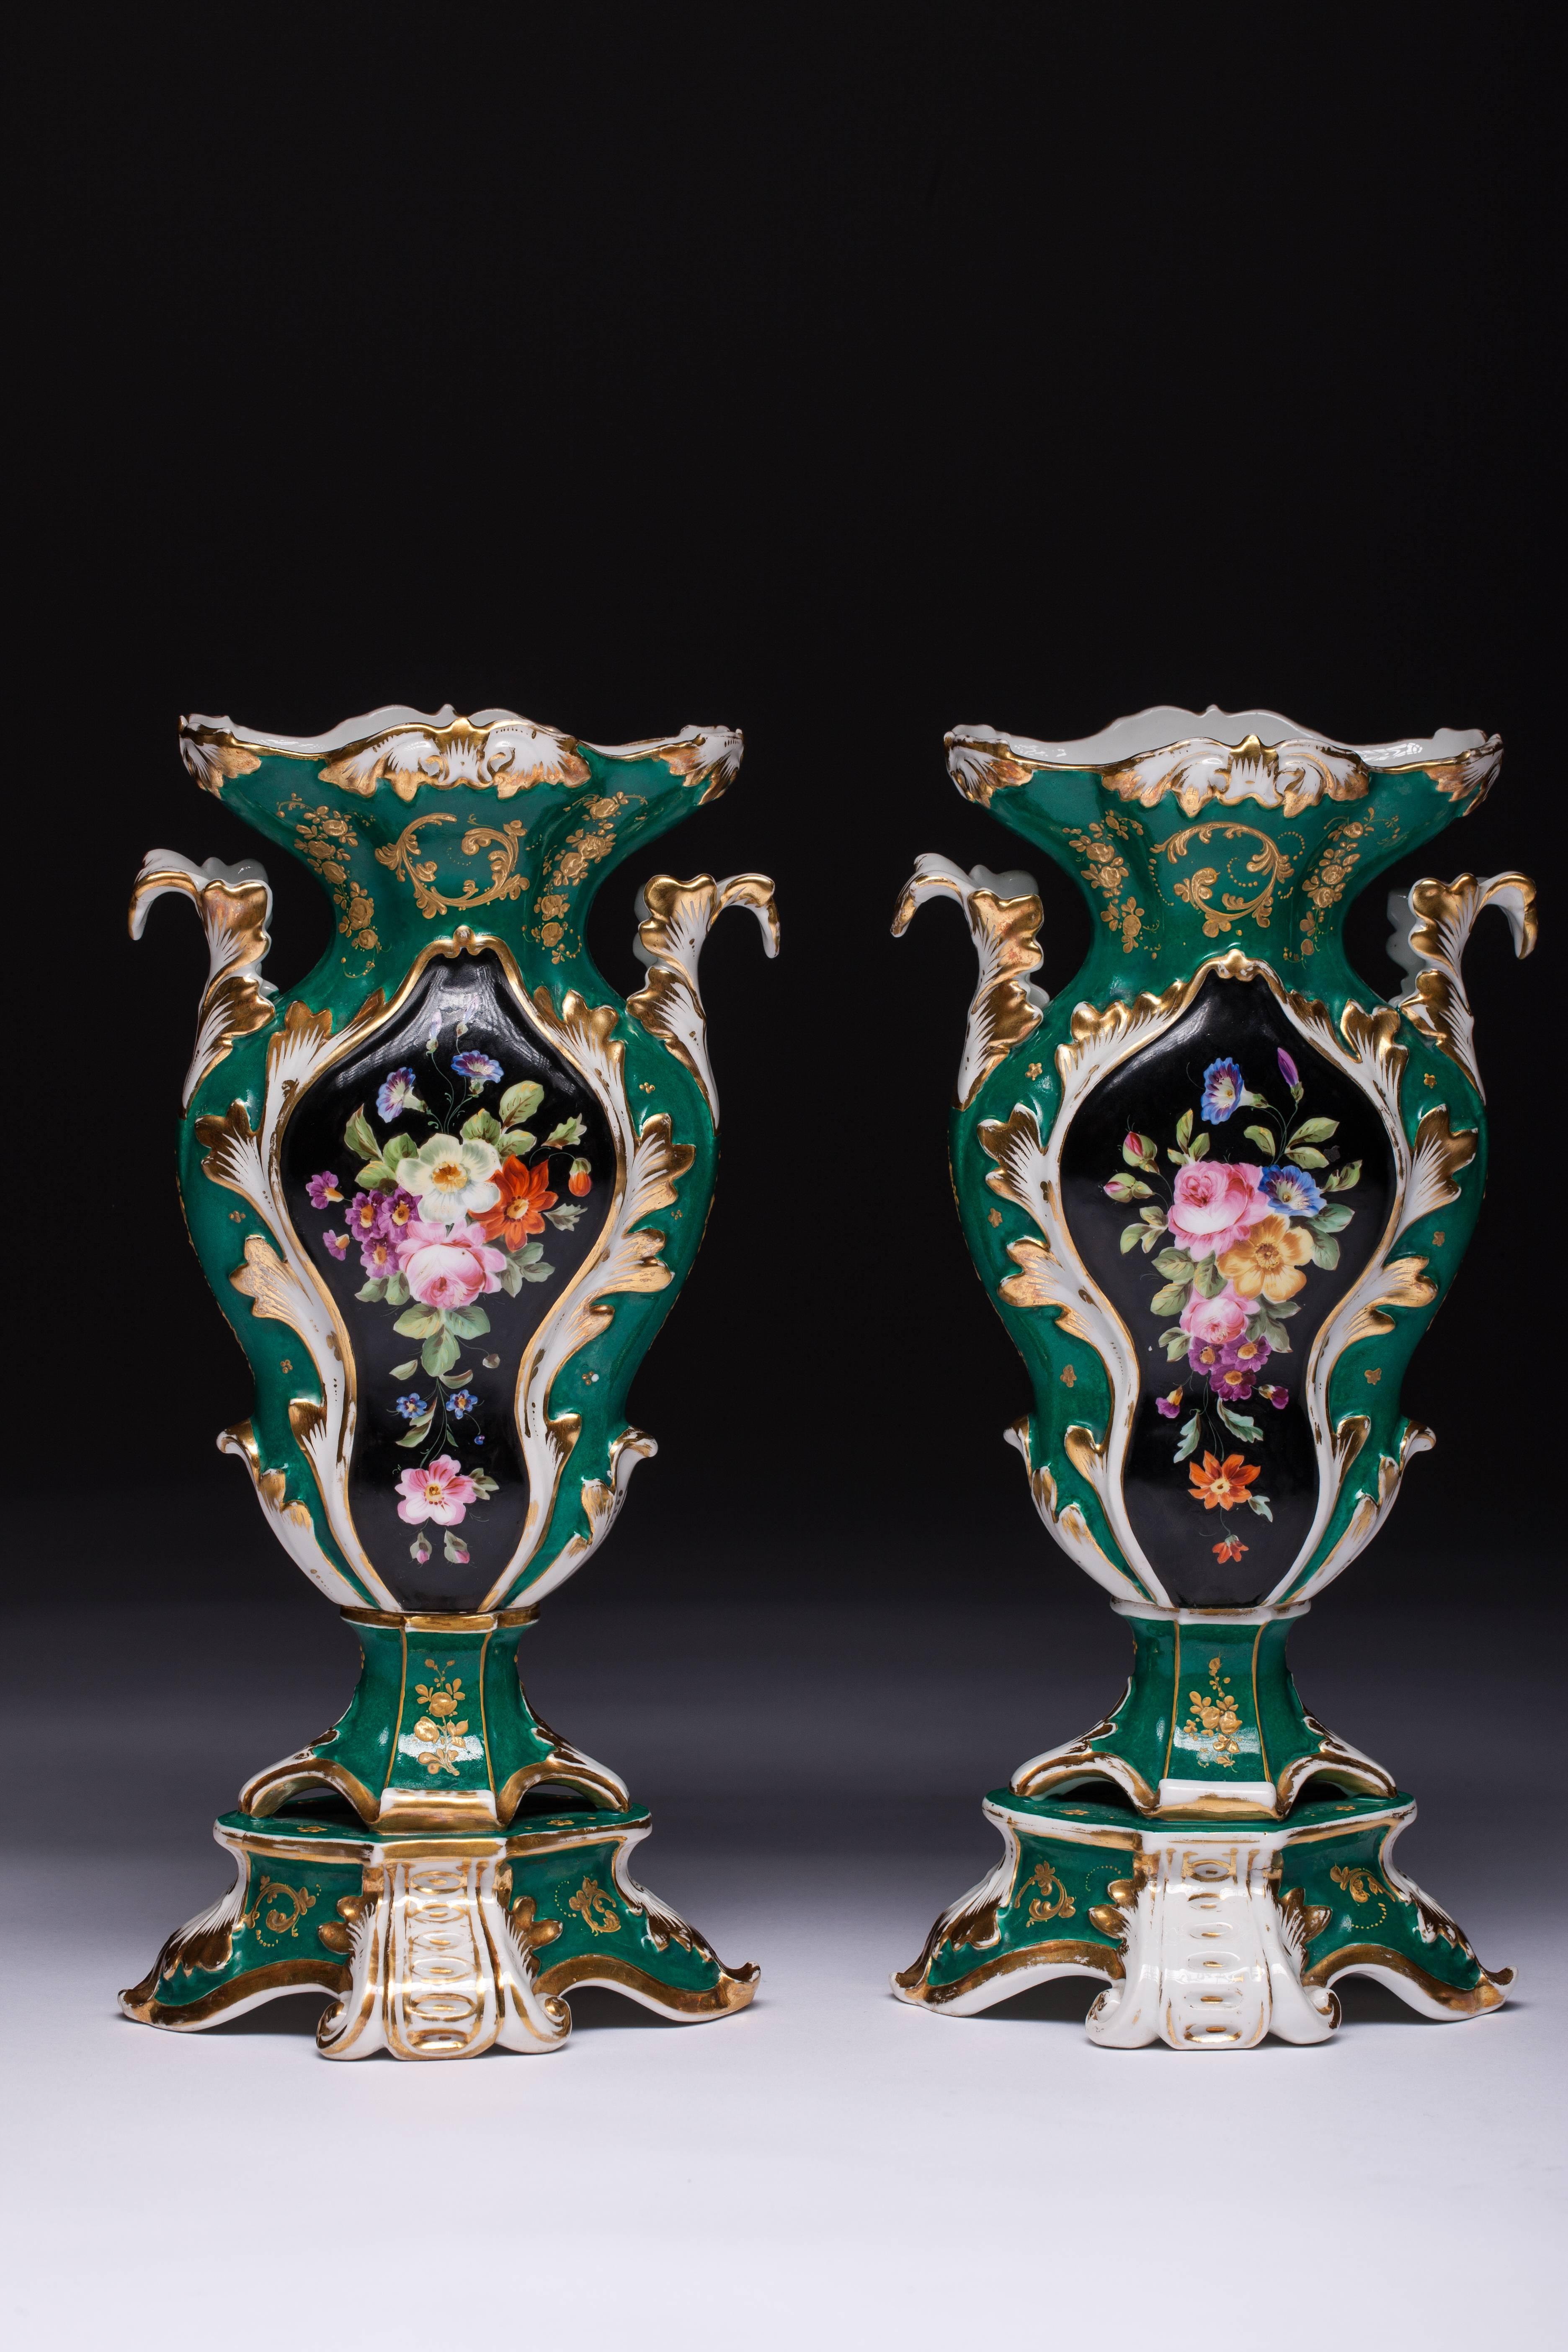 Beautiful pair of Old Paris porcelain vases with a stamp at the bottom F. A. Green Rococo-style vases hand painted with flowers on a black background which is decorated with golden leaves around. Both sides is painted with flowers. Vases are